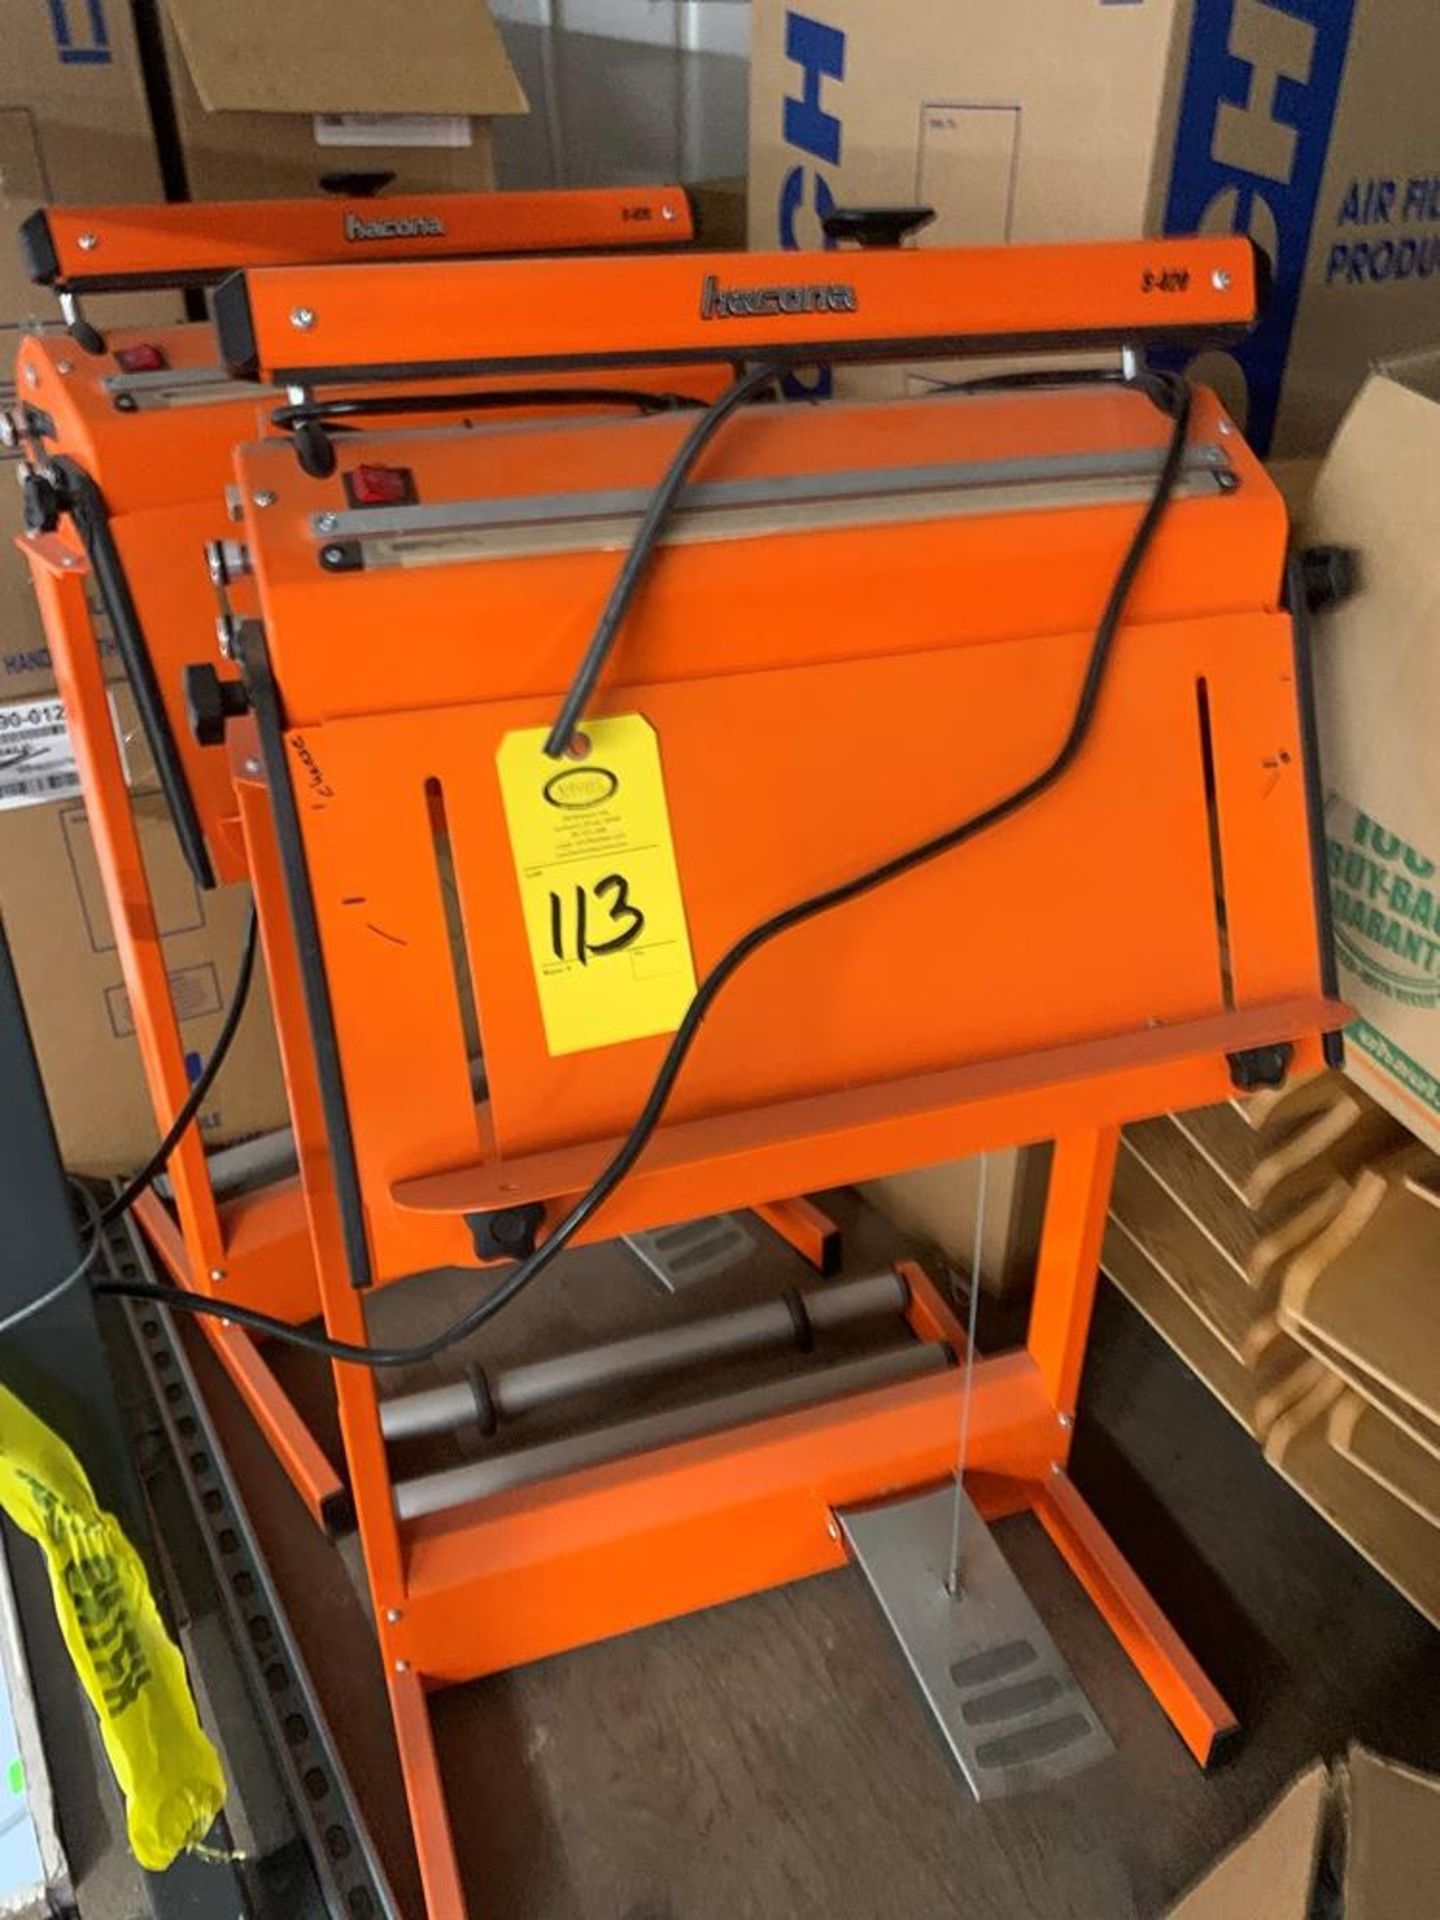 HACNOA Mdl. S420 Manual Sealer, 18" seal bar (Required Loading Fee: $50.00) NO HAND CARRY (Price